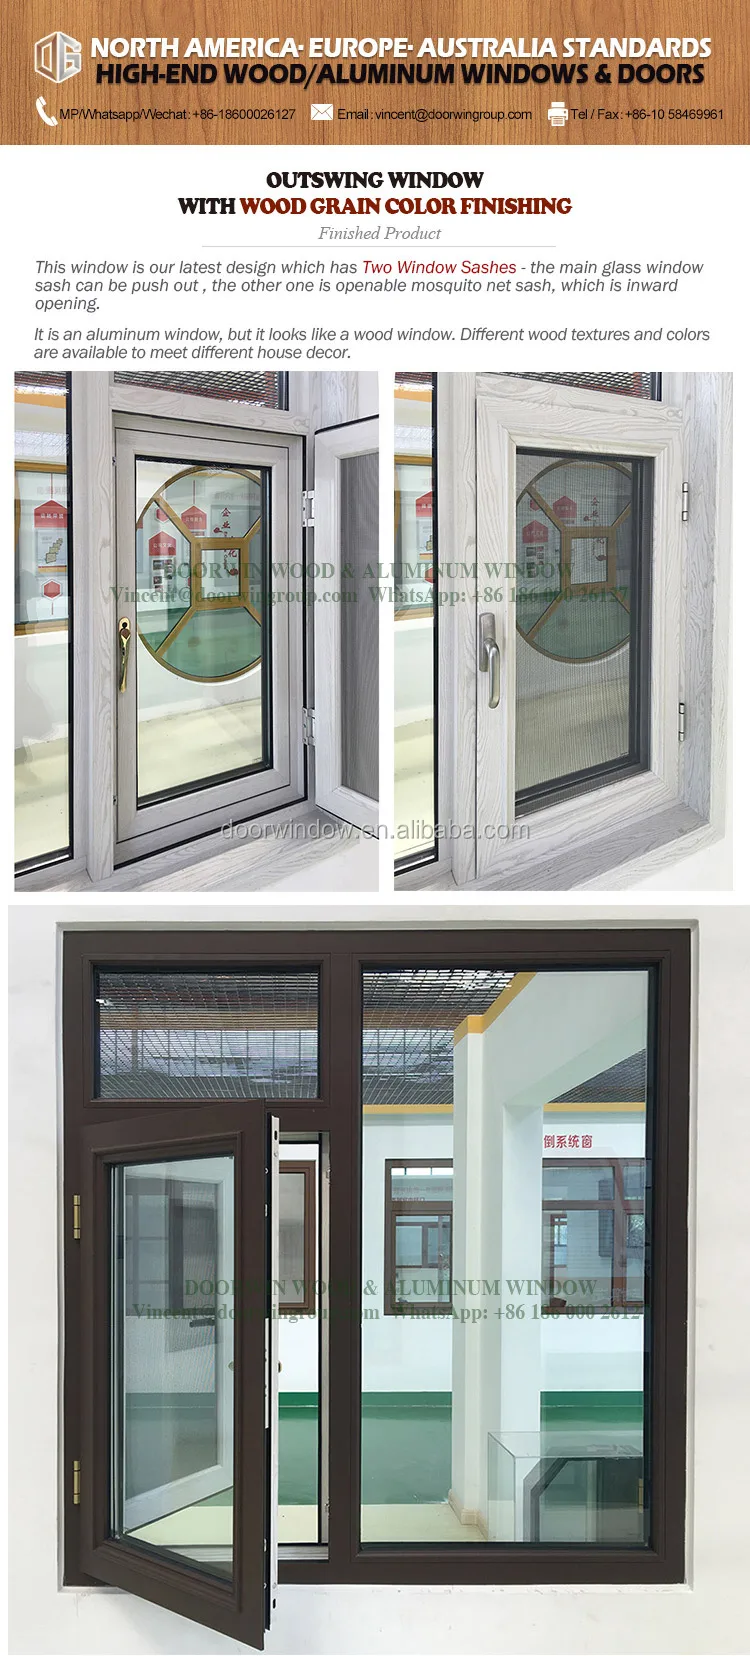 Texas white wholesale shatterproof outswing window with wood grain color finishing  windows with safety glass